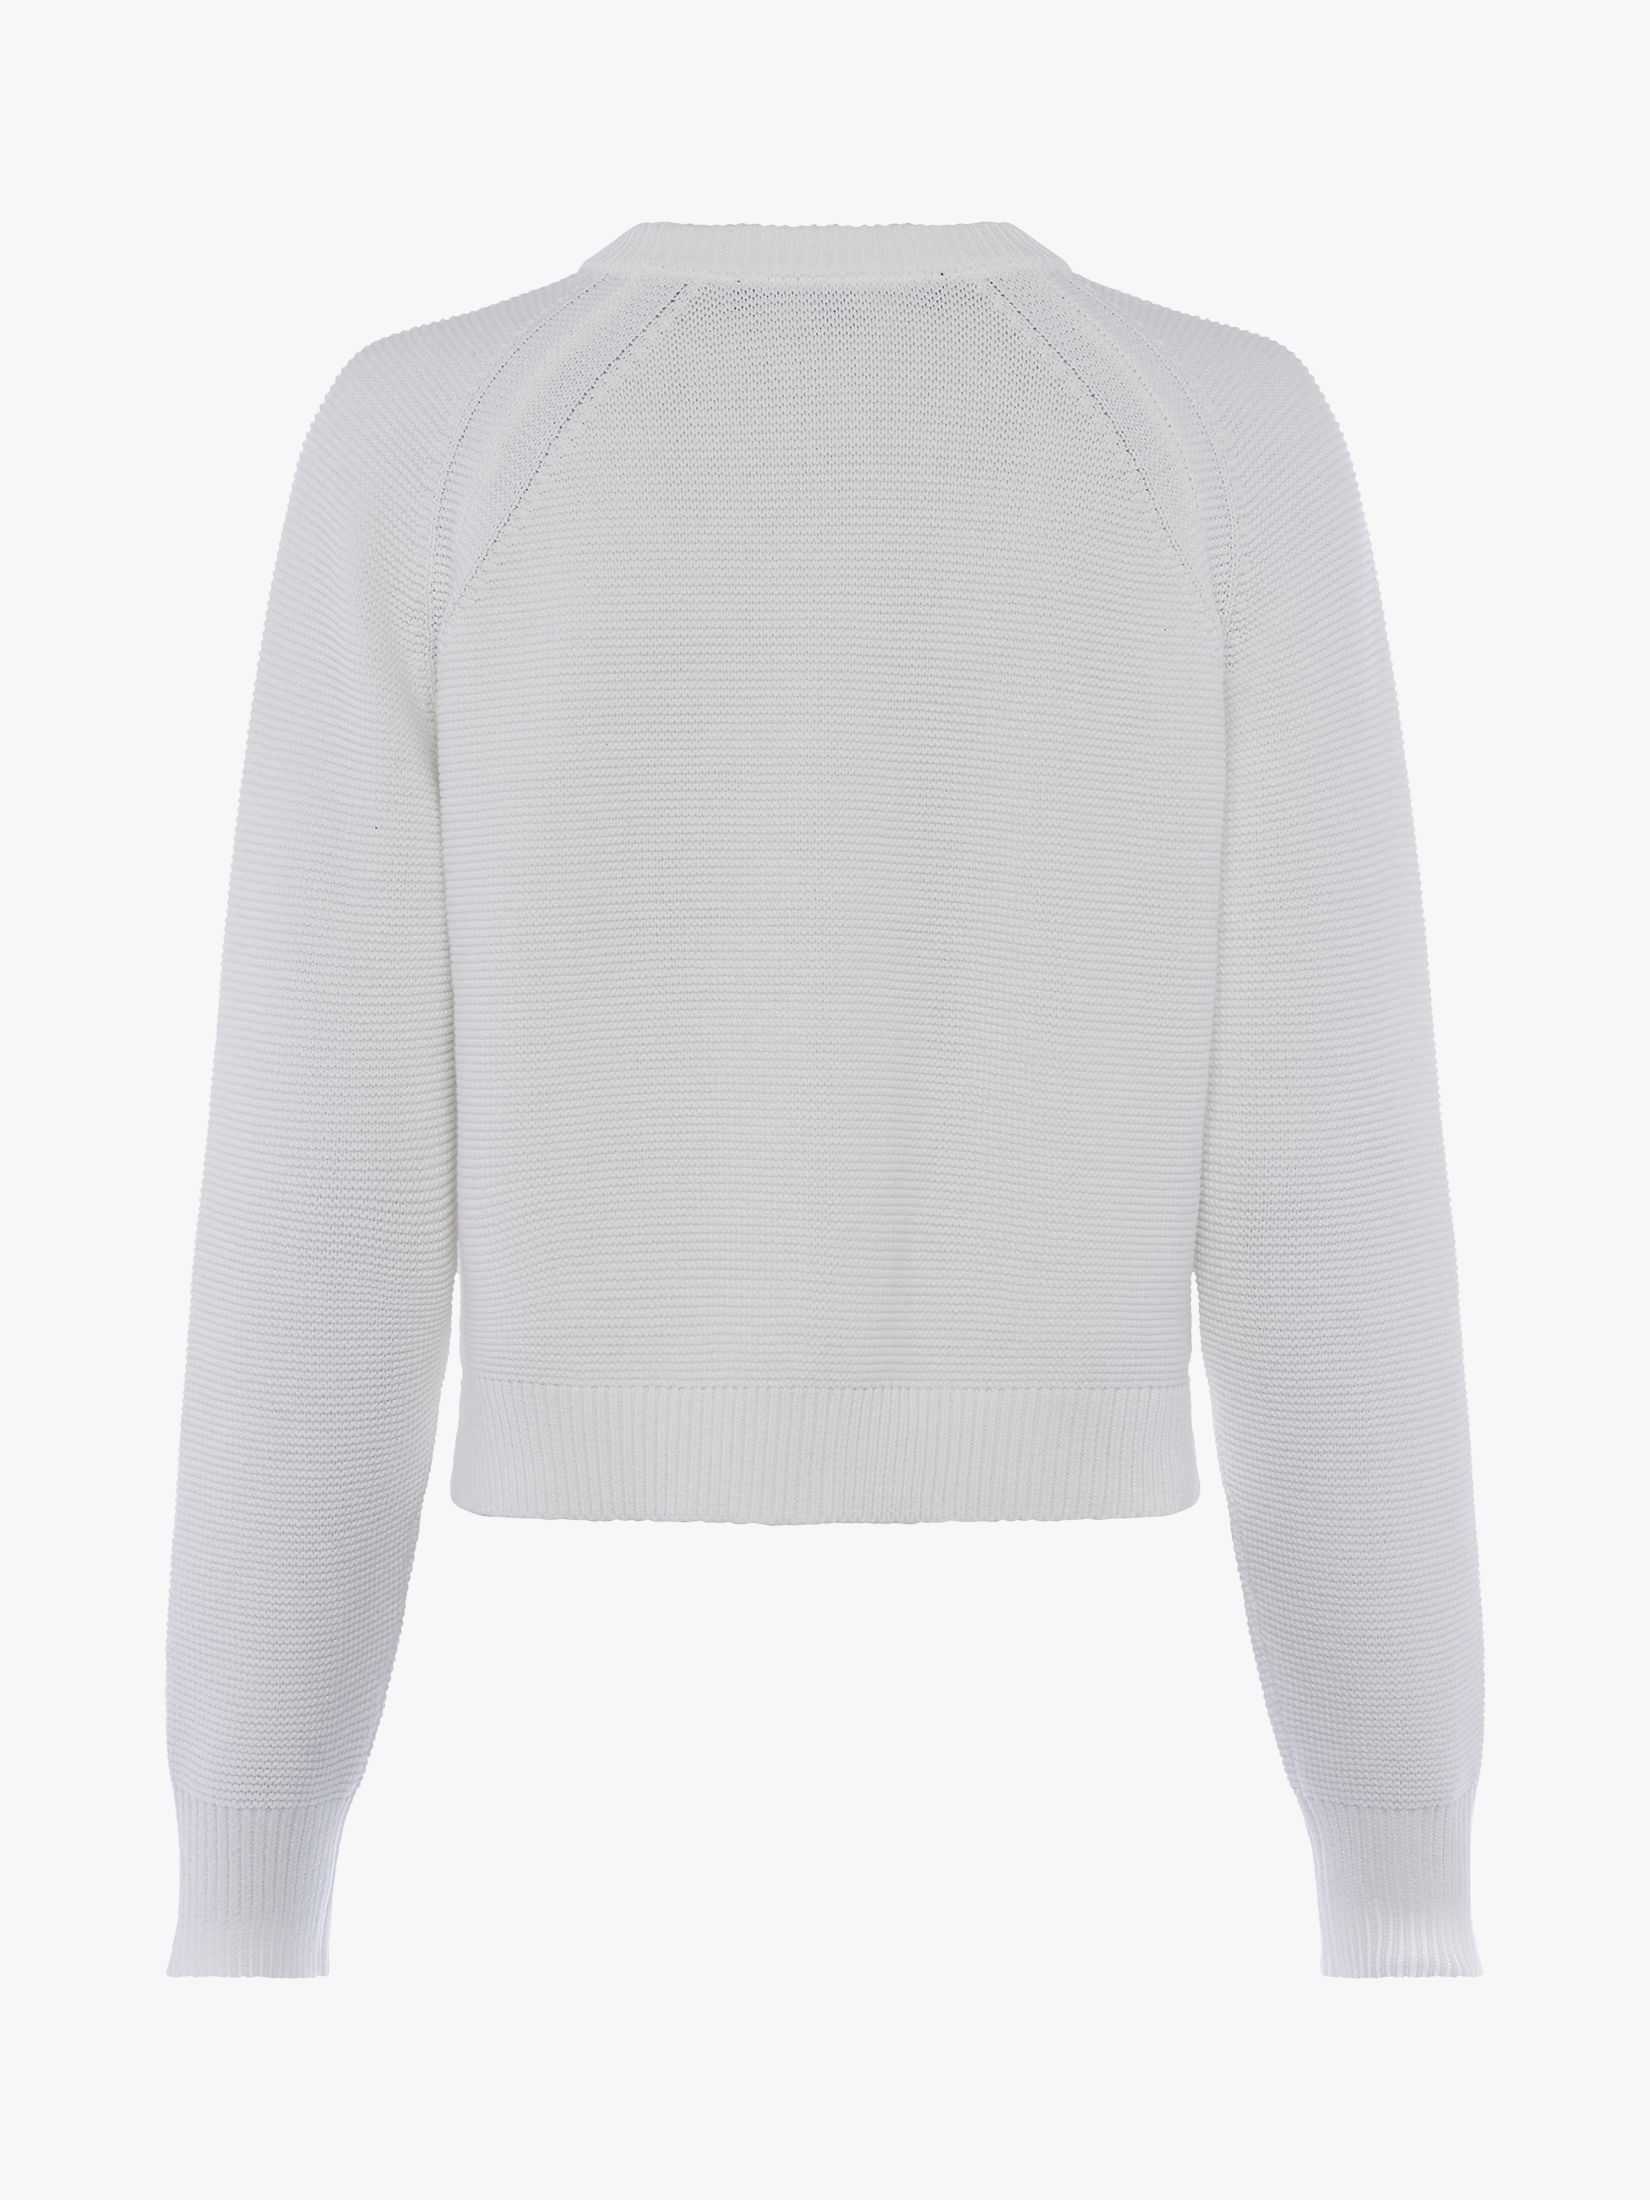 Buy French Connection Lilly Mozart Crew Neck Jumper Online at johnlewis.com